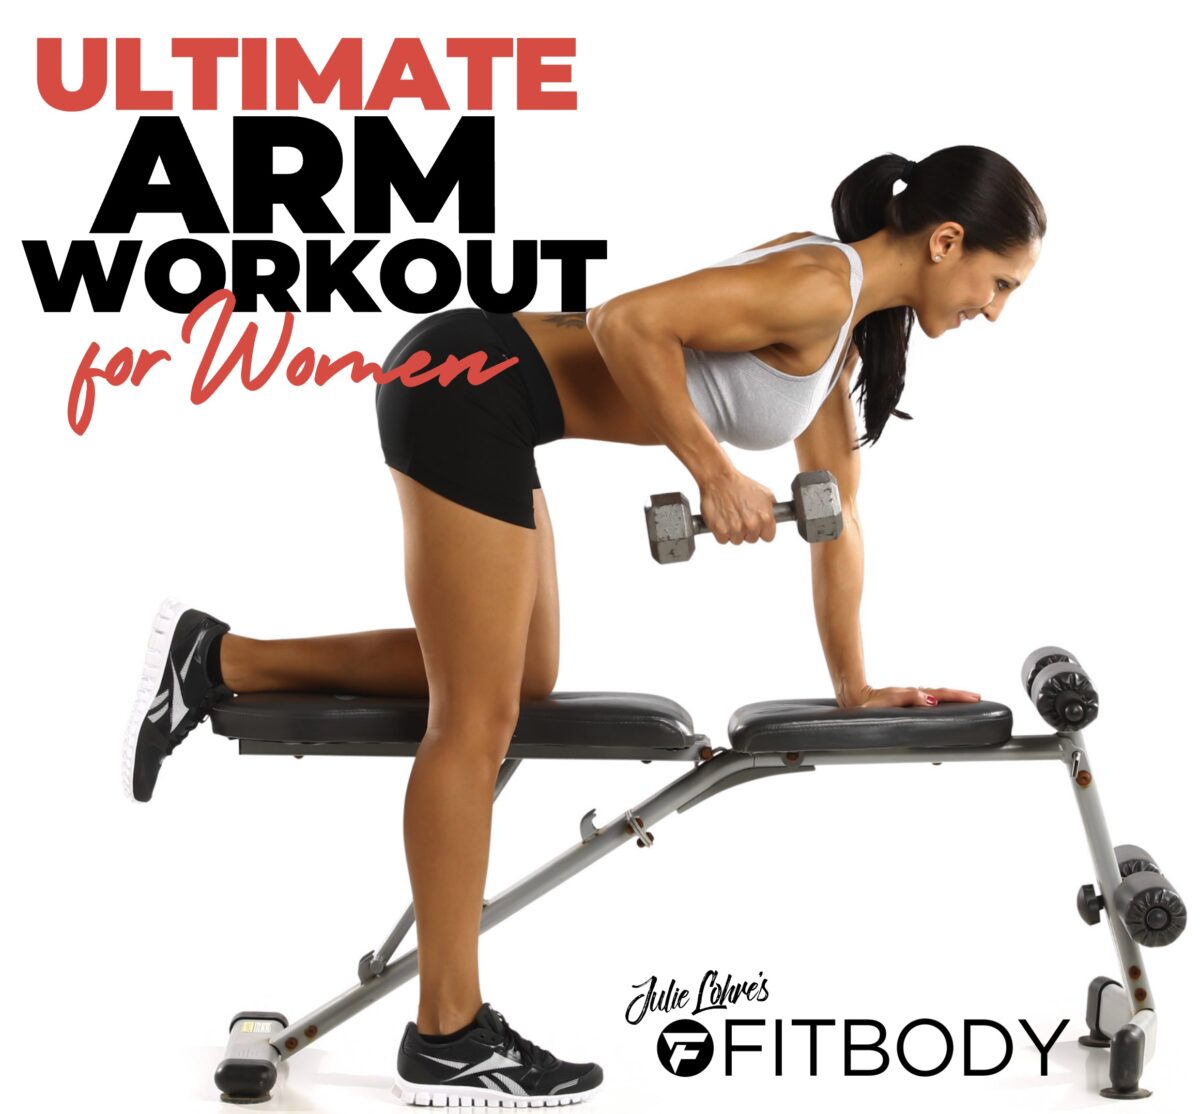 Arm workout for women exercises